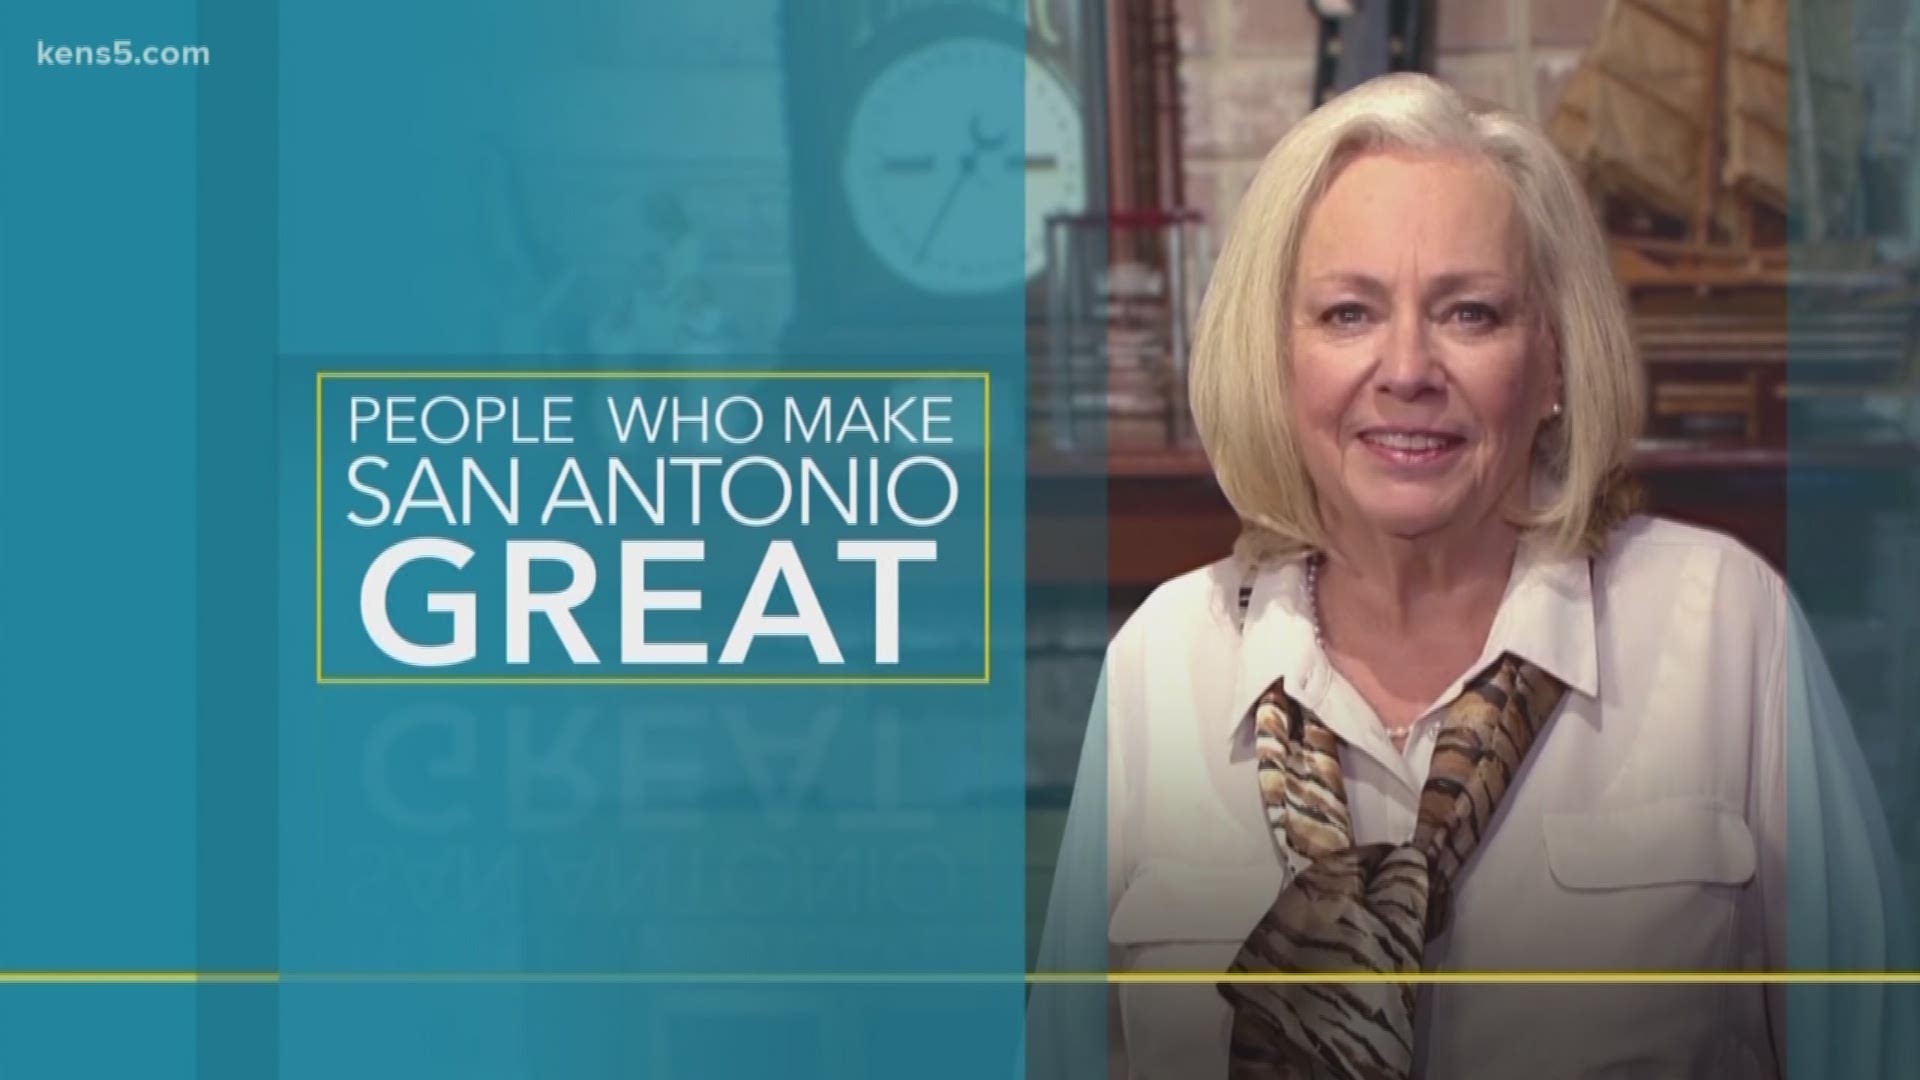 Suzanne Hildebrand's advocacy to help San Antonio stroke victims and changing lives along the way is why she's one of the people that makes San Antonio great.